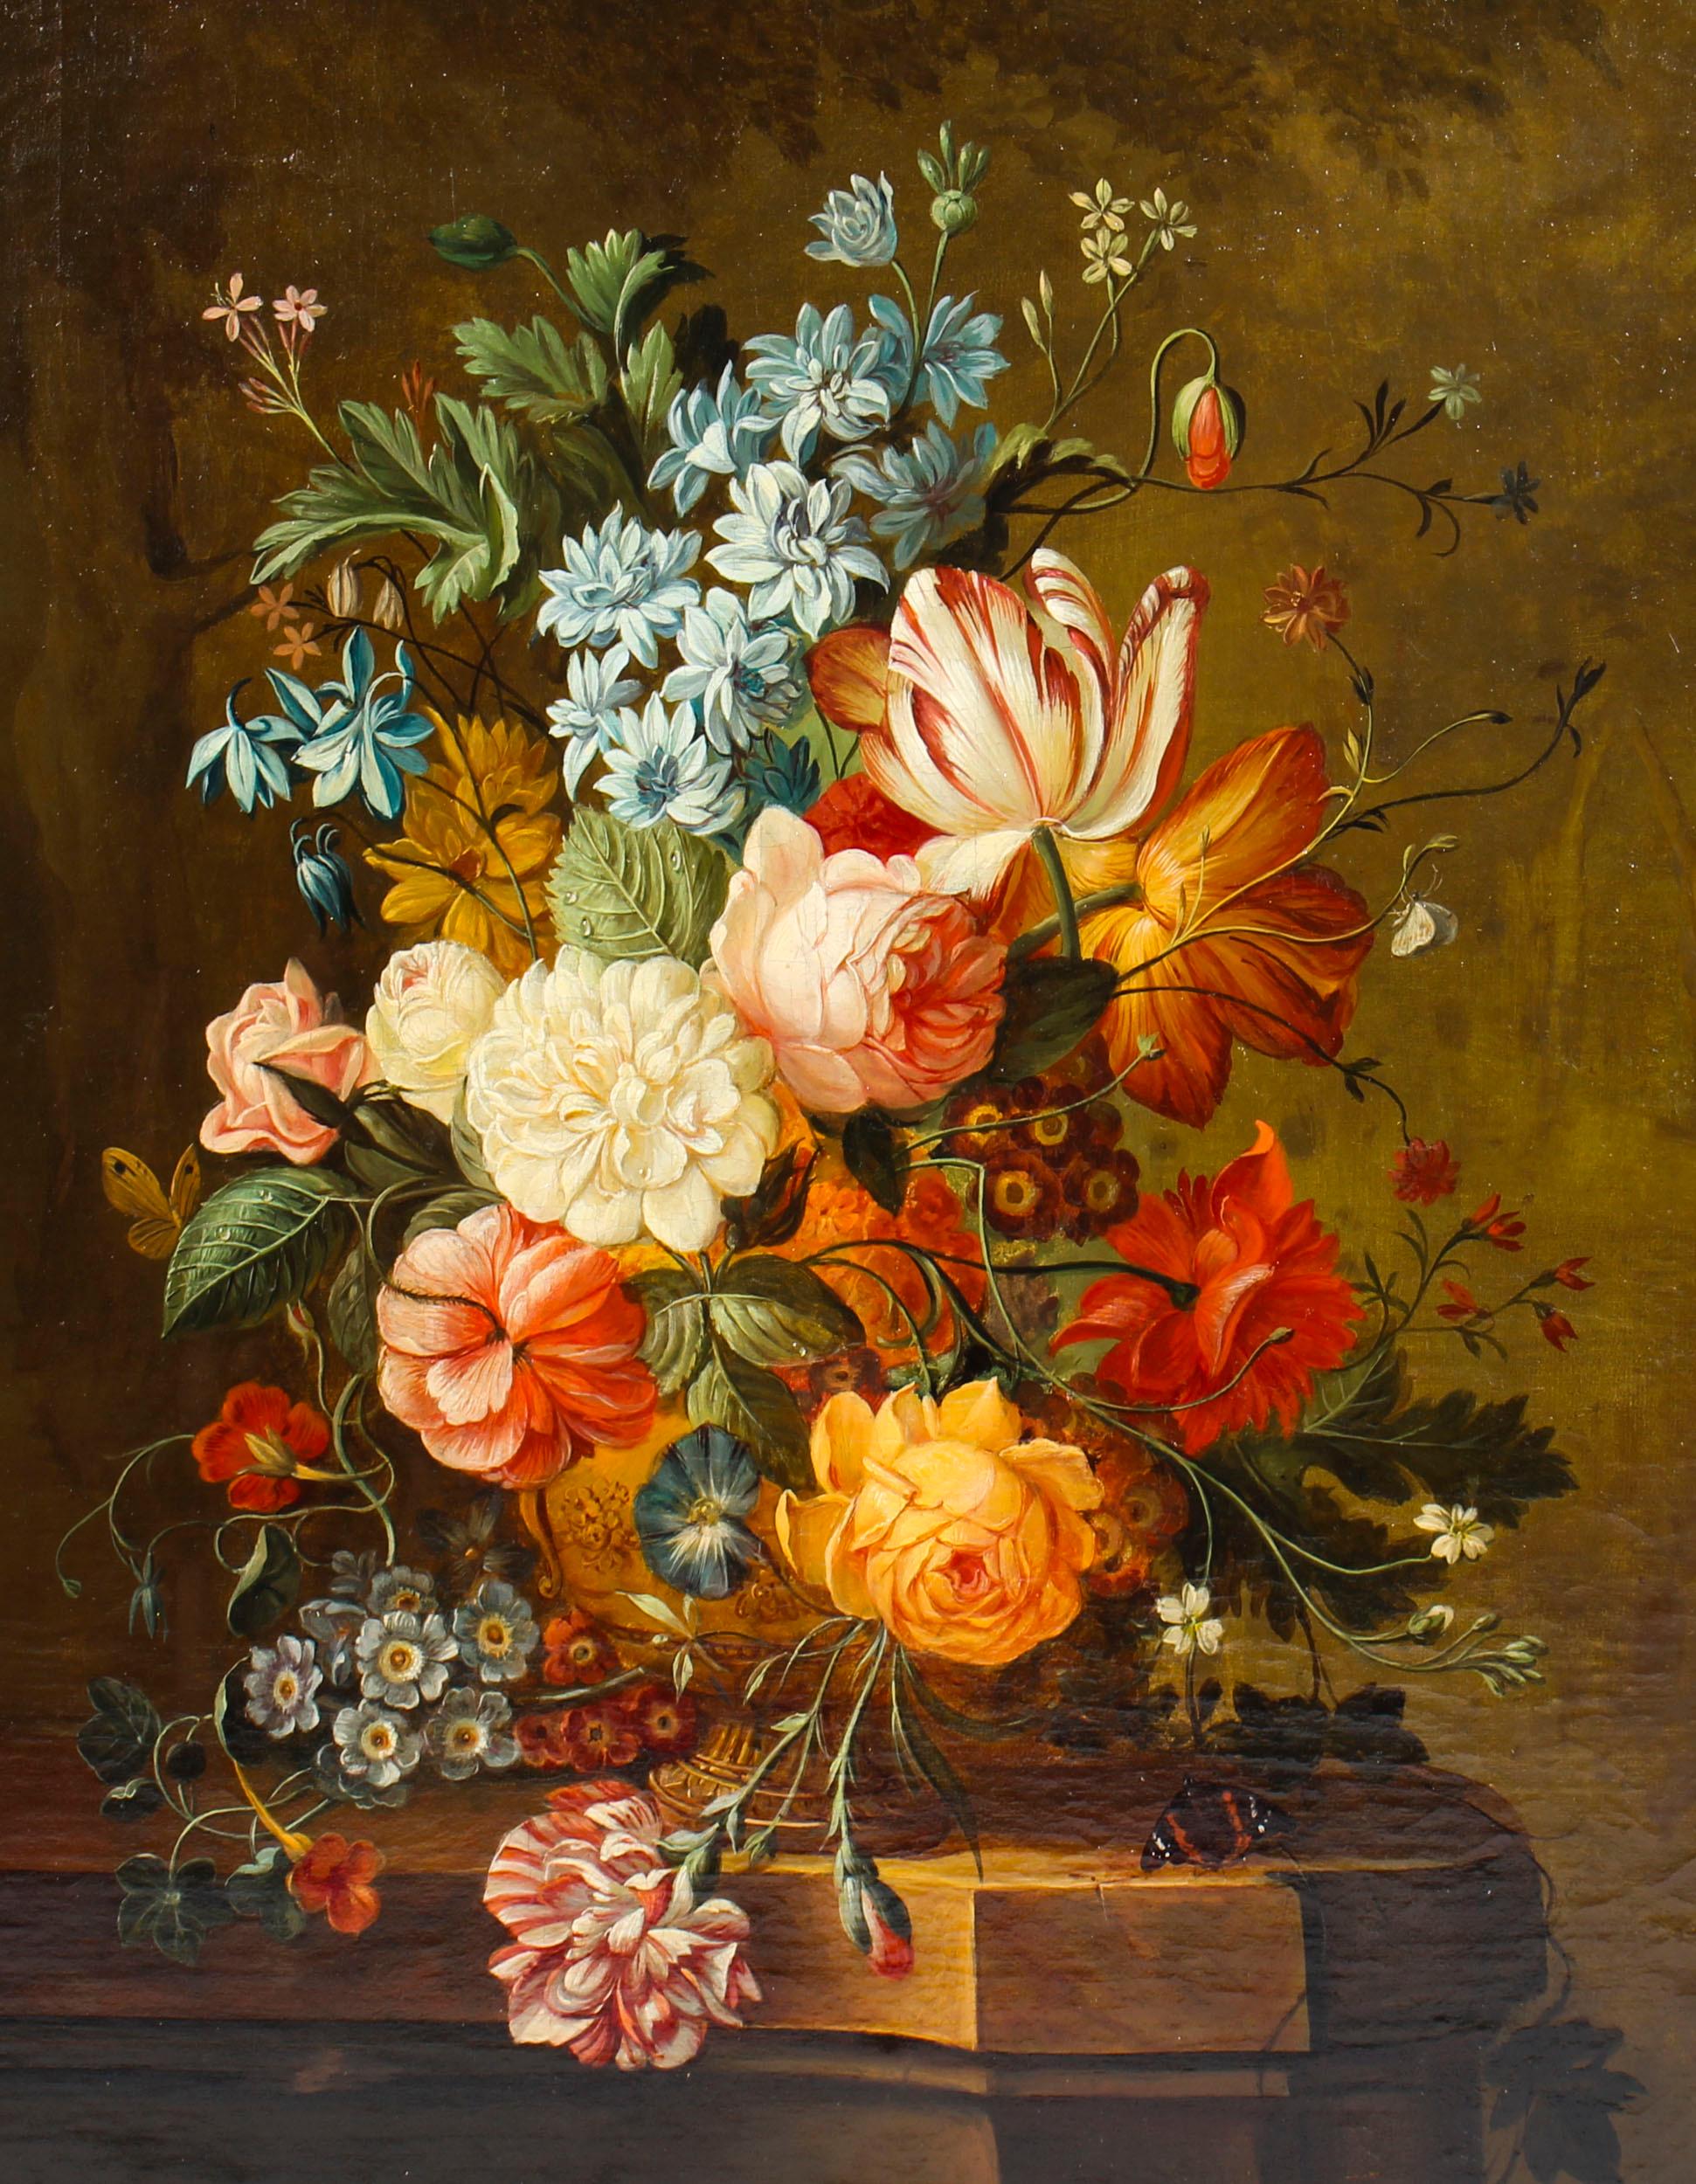 This is a magnificent antique Dutch School floral still life oil on canvas painting with a stunning gilt gesso frame, late 18th century in date.
 
This splendid painting is rectangular in shape and features brightly illuminated pastel-tinted roses